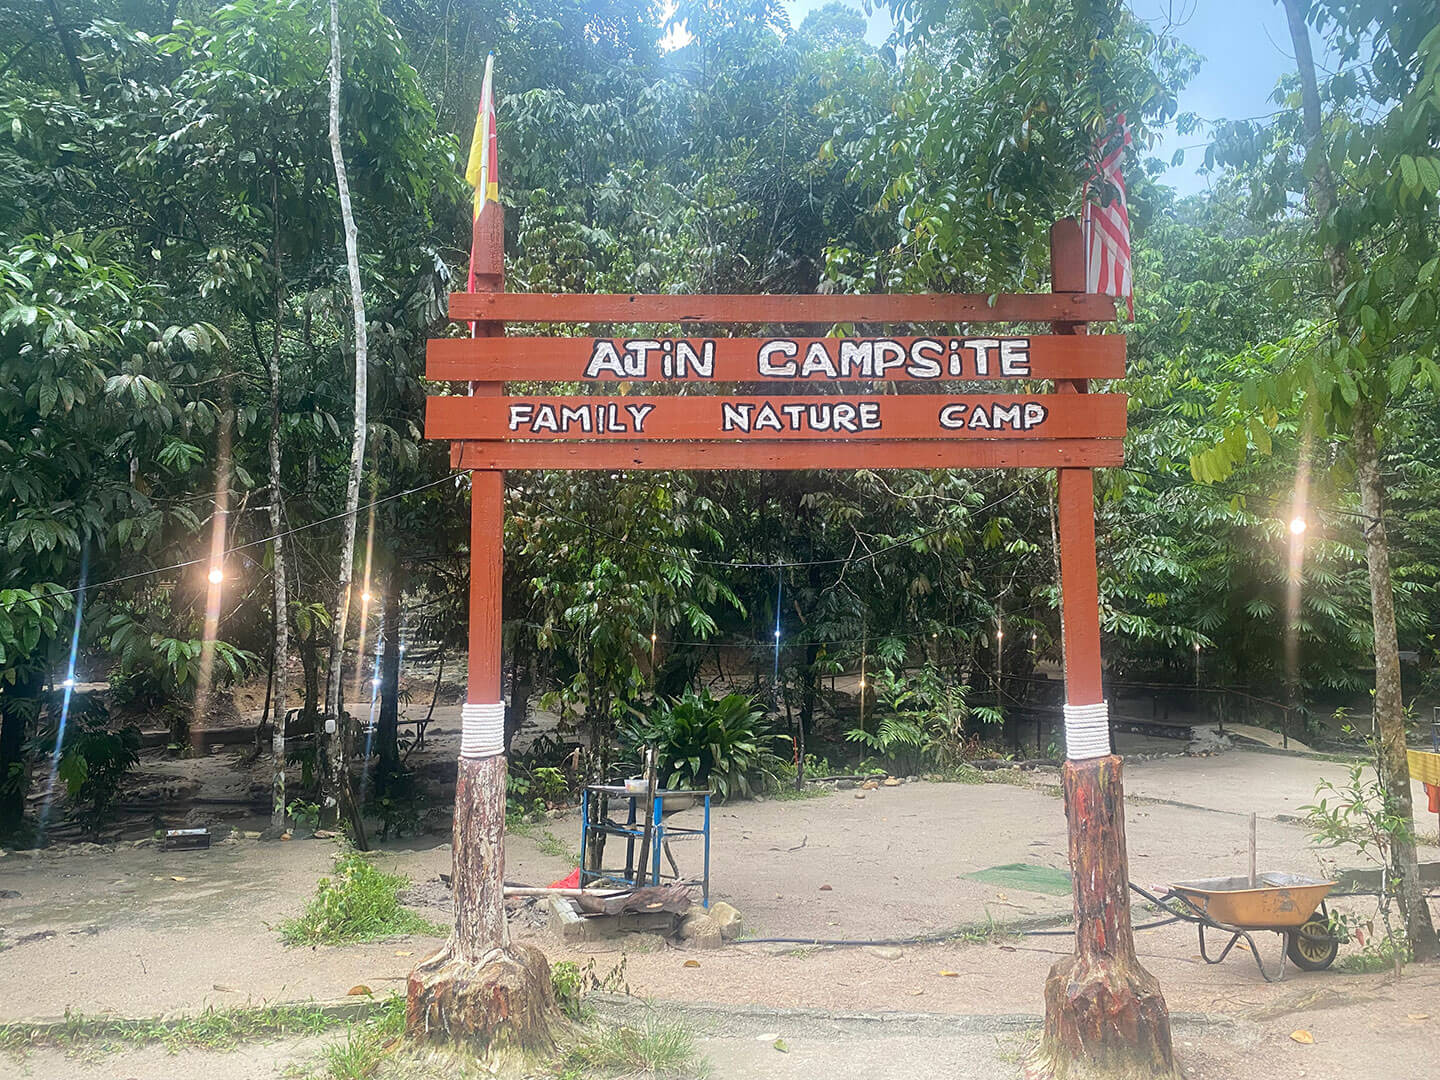 Ajin Campsite in Selangor is one of the many camping sites in Selangor located in Hulu Langat. And like others, it is close to the river.

It may be new (since 2021), but Ajin Campsite is gaining popularity among the local camping community. Its charms lie in the pristine surroundings – a lush jungle with a constant hum of running water from the nearby river.

Ajin Campsite Semungkis also offers picnic option (day trip). Picnic option is only available for walk-in customers and the lot is assigned by the campsite subjected to availability.